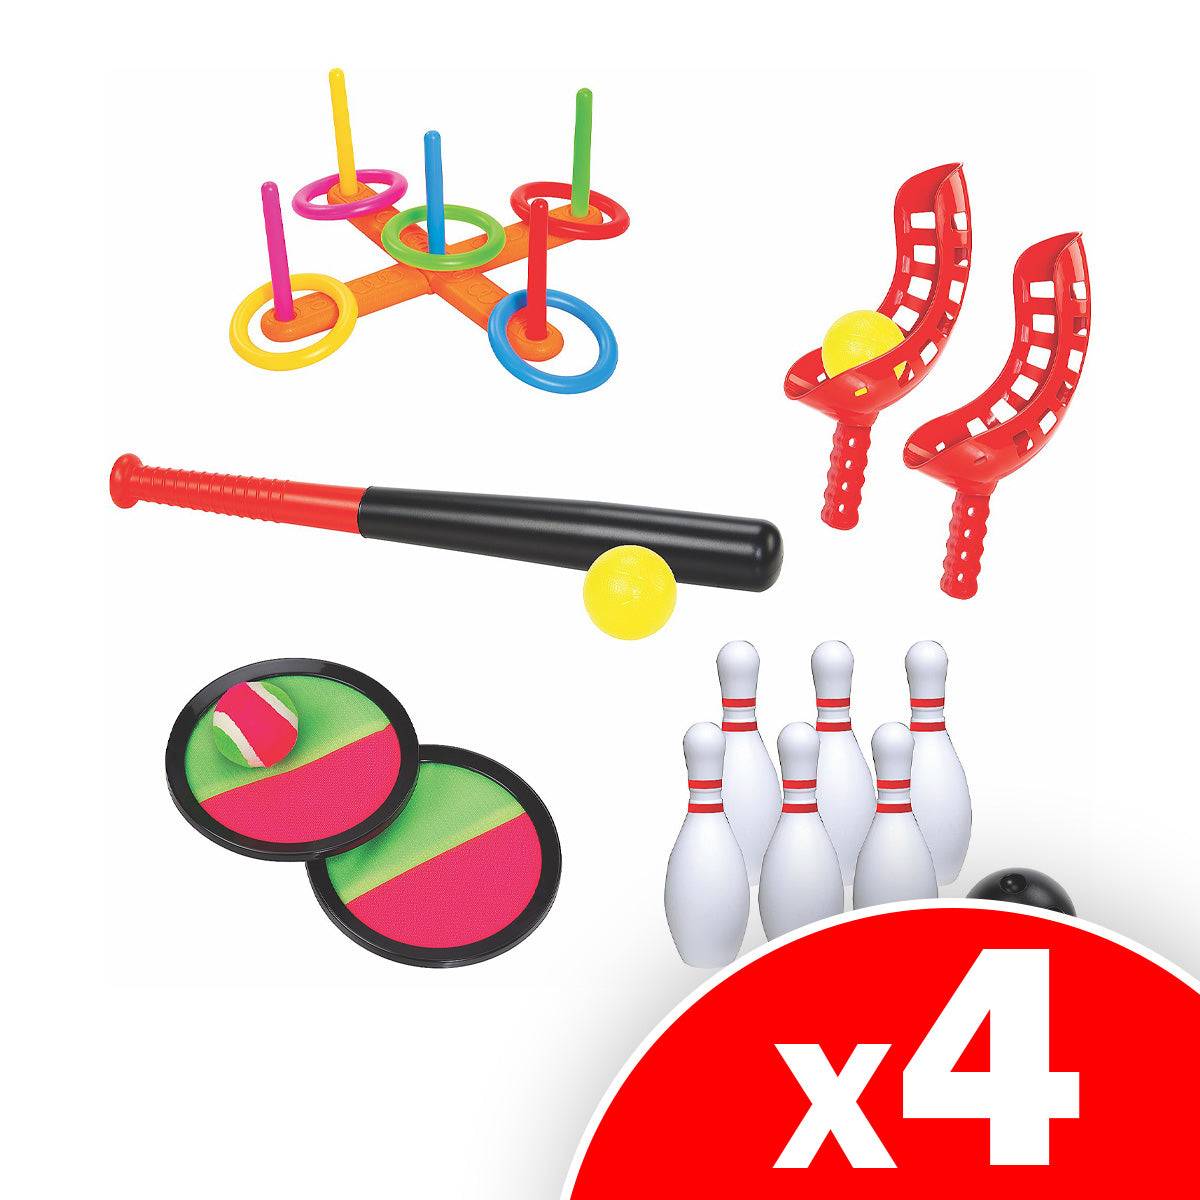 ETNA TOYS - 5-in-1 Sports Family Outdoor Yard Games Set, 4 Pack